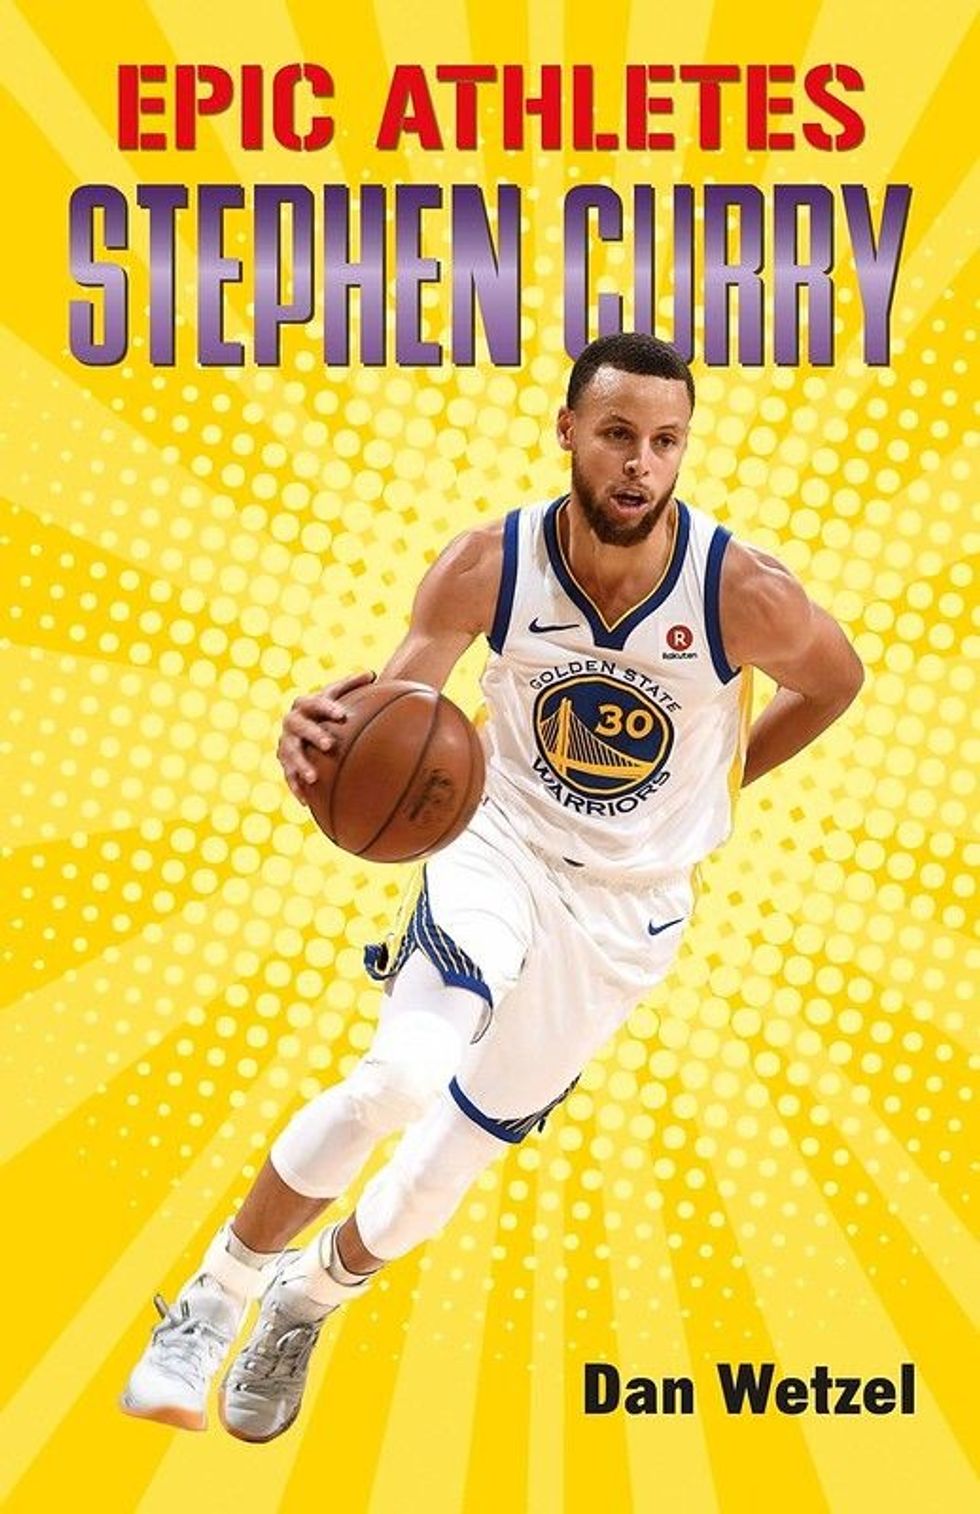 Stephen Curry is a popular professional basketball player in NBA.